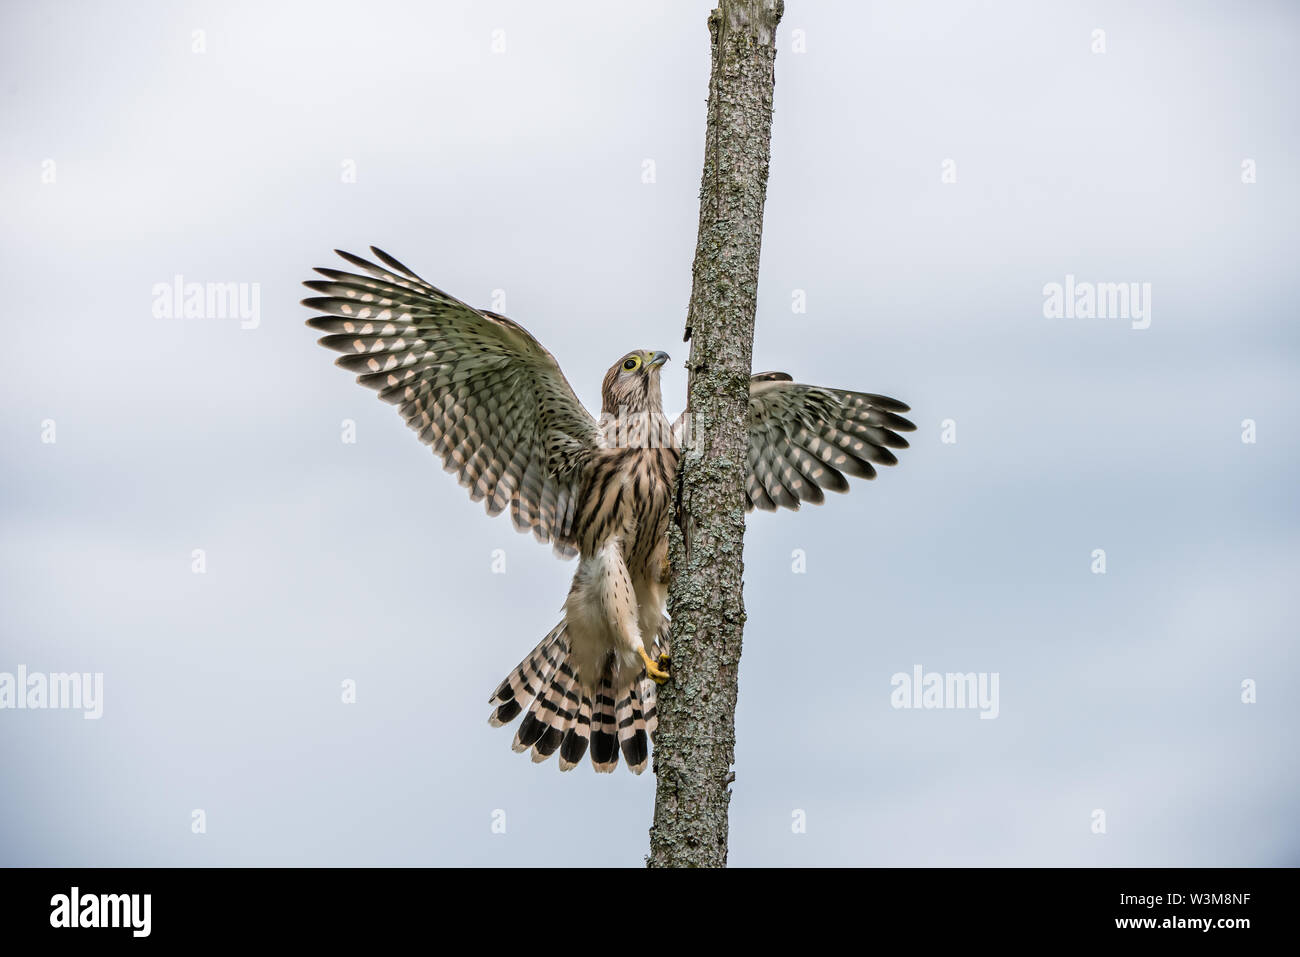 The young Kestrel climb a wooden fence pole with a nice defocused  sky in the background Stock Photo